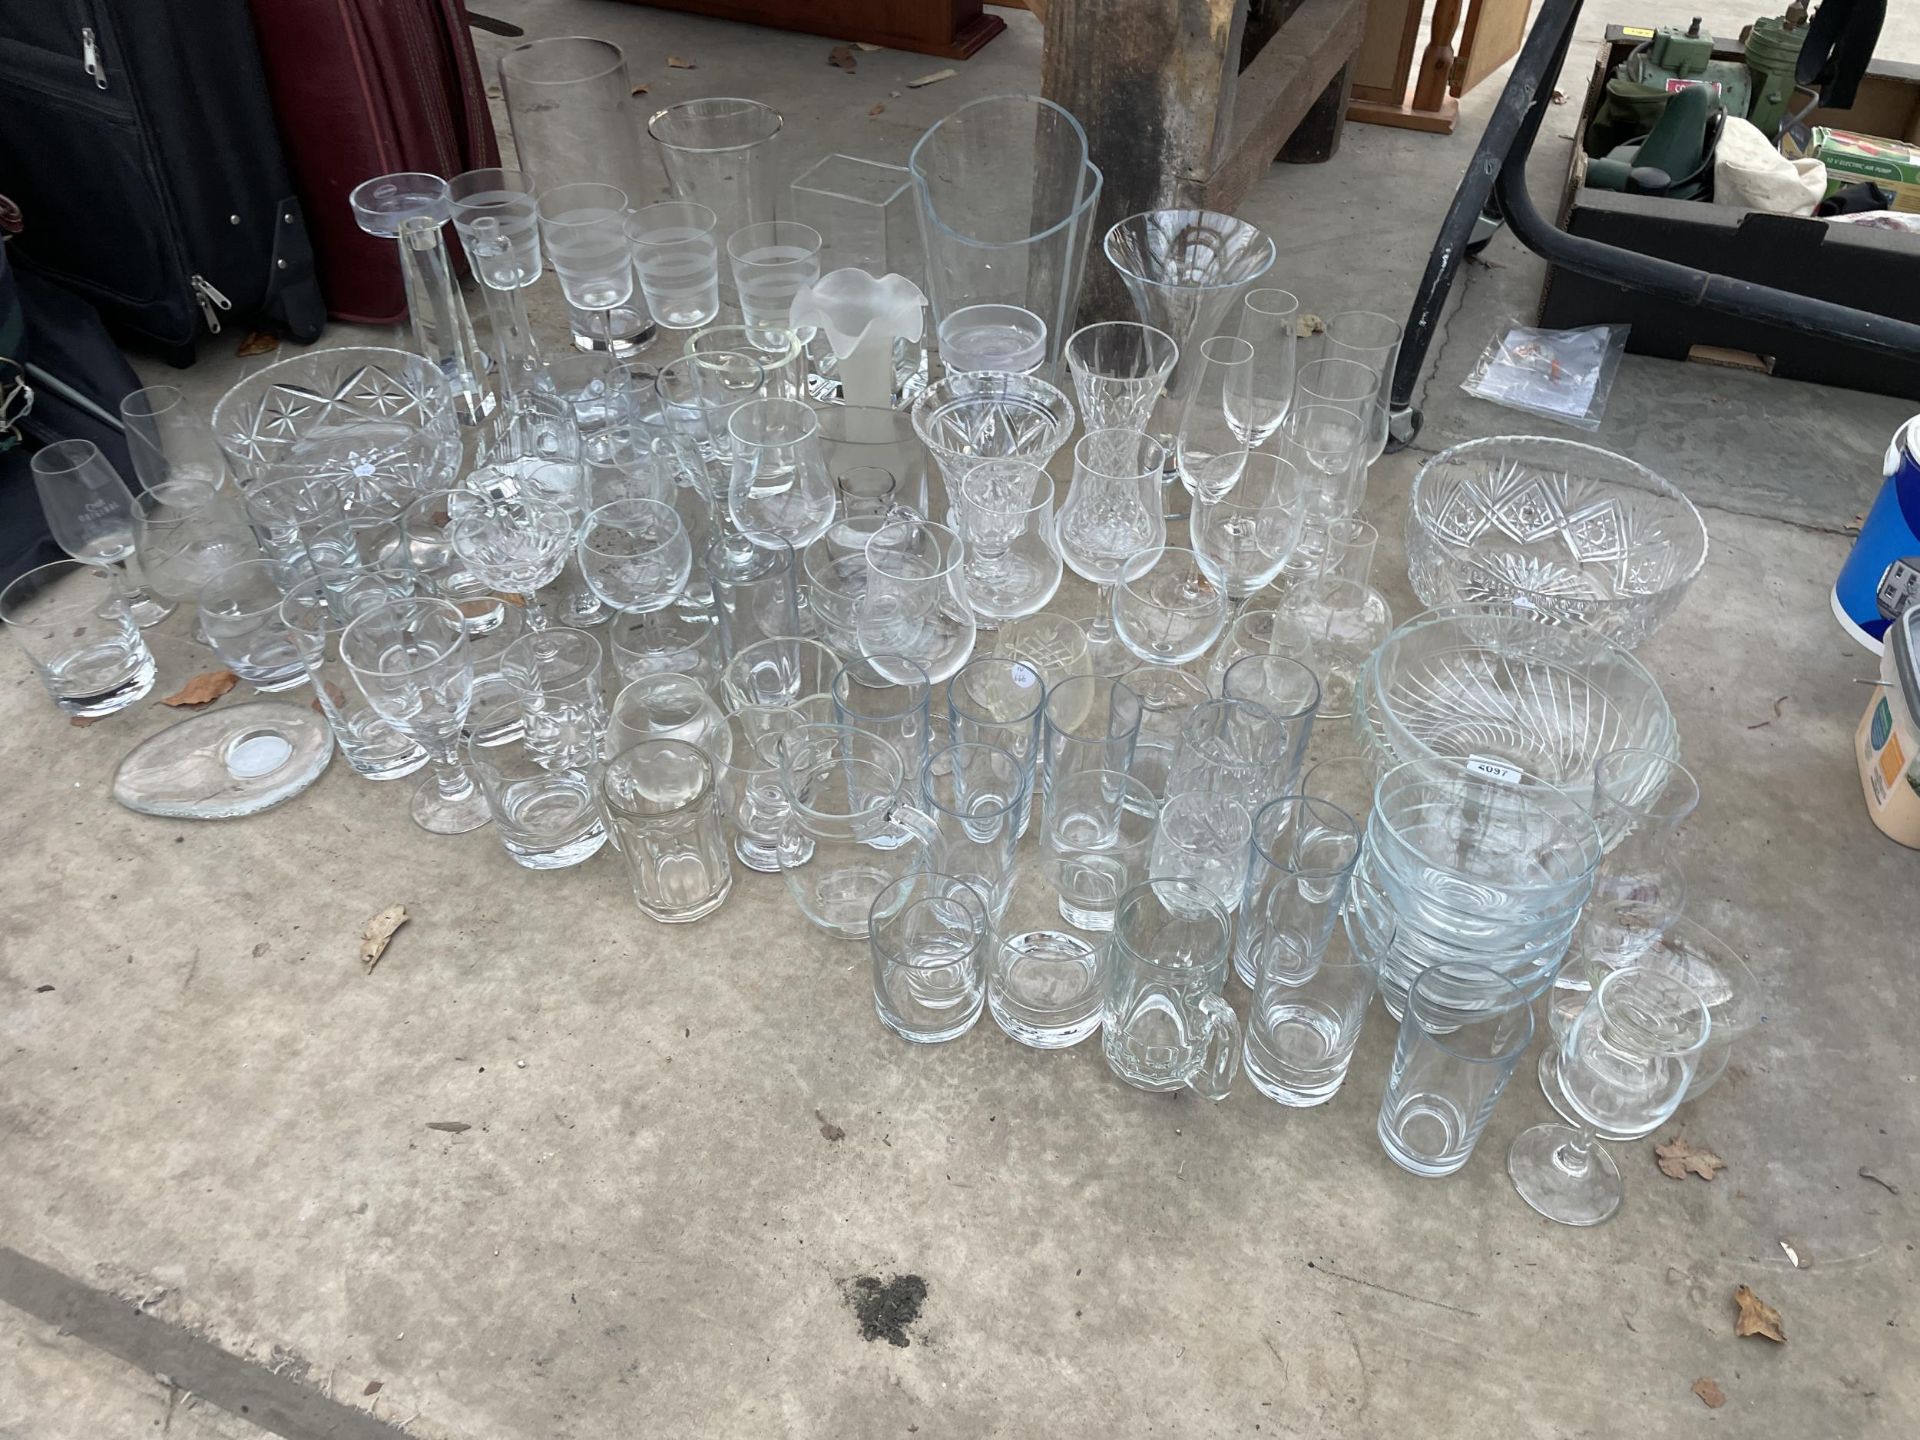 A LARGE ASSORTMENT OF GLASS WARE TO INCLUDE BOWLS, VASES AND DRINKING GLASSES ETC